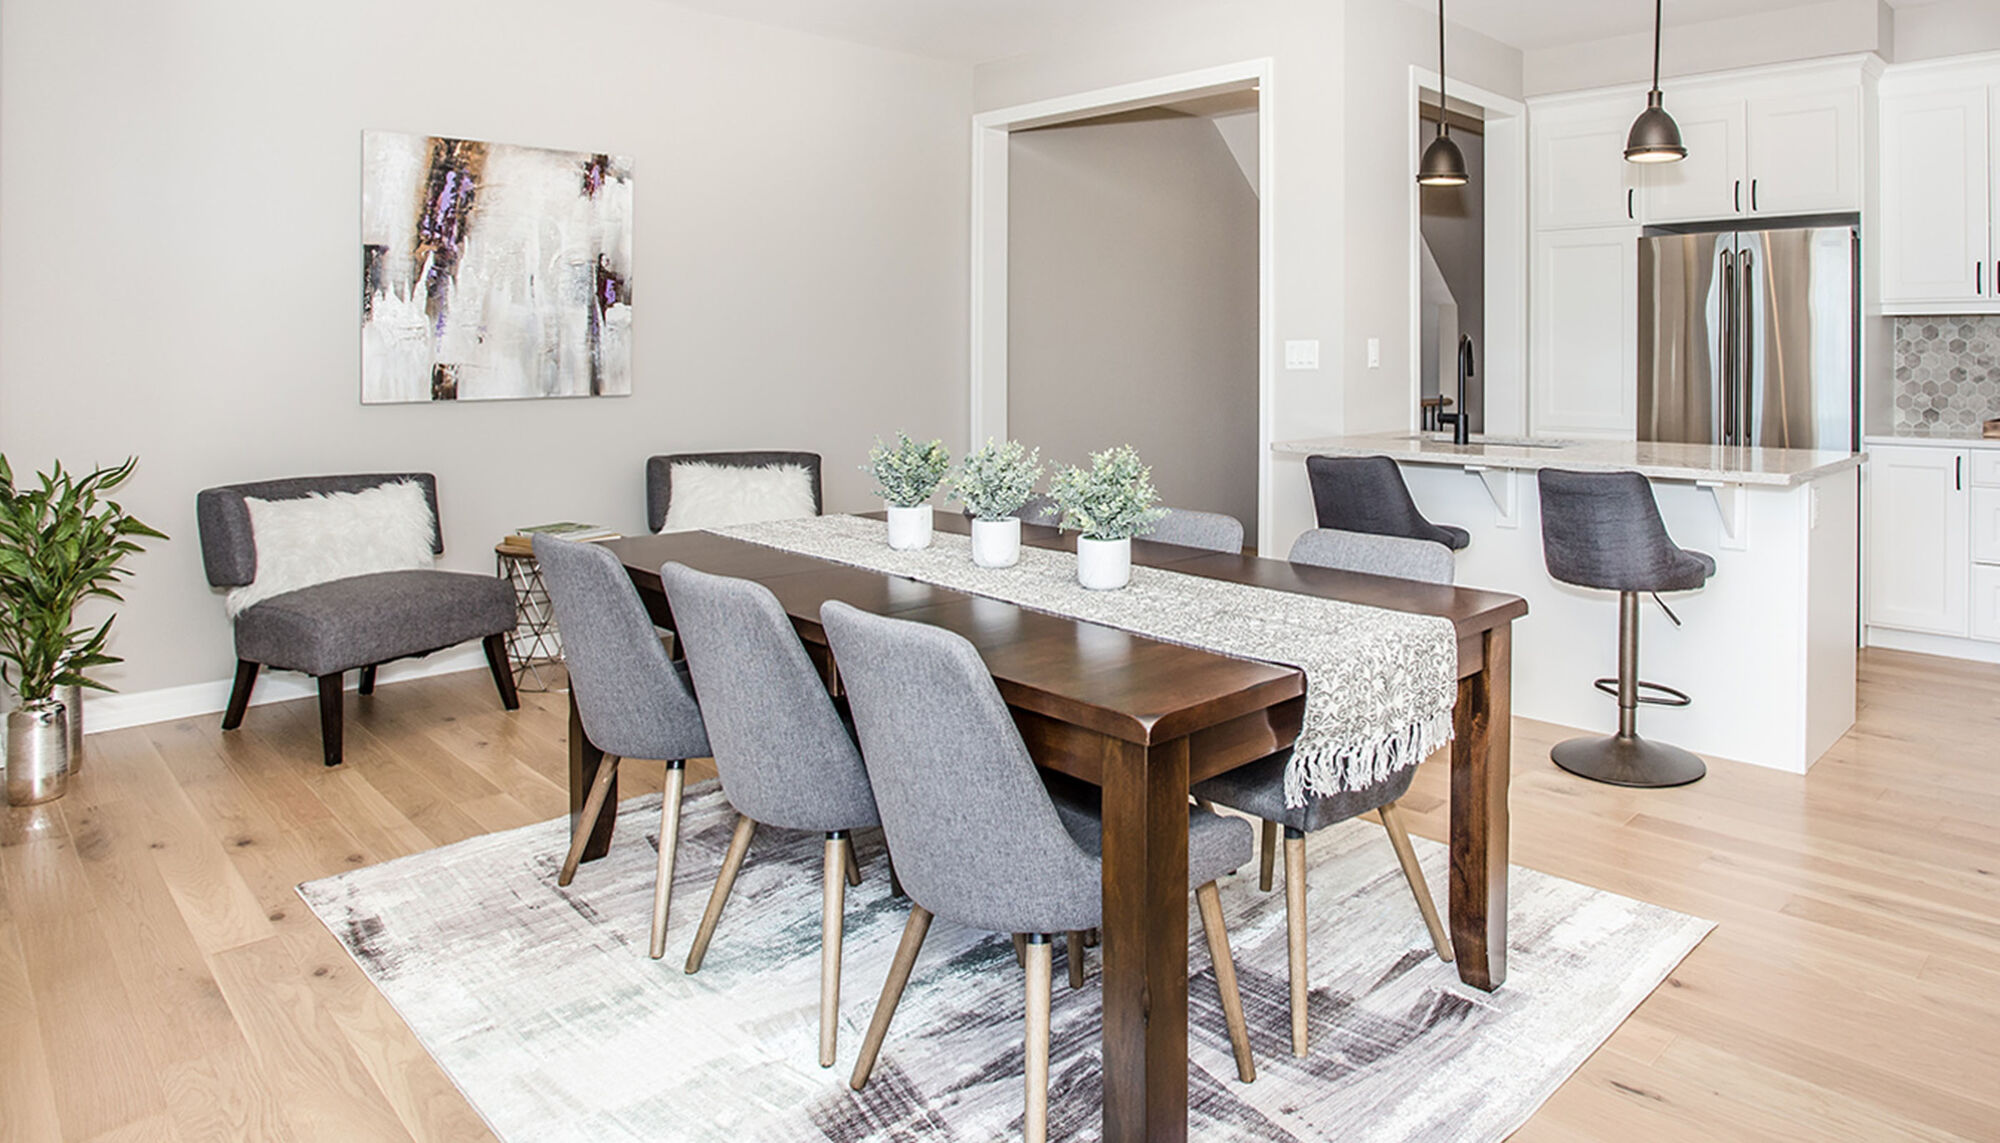 Dining Room with a rectangular wooden table surrounded by grey chairs.